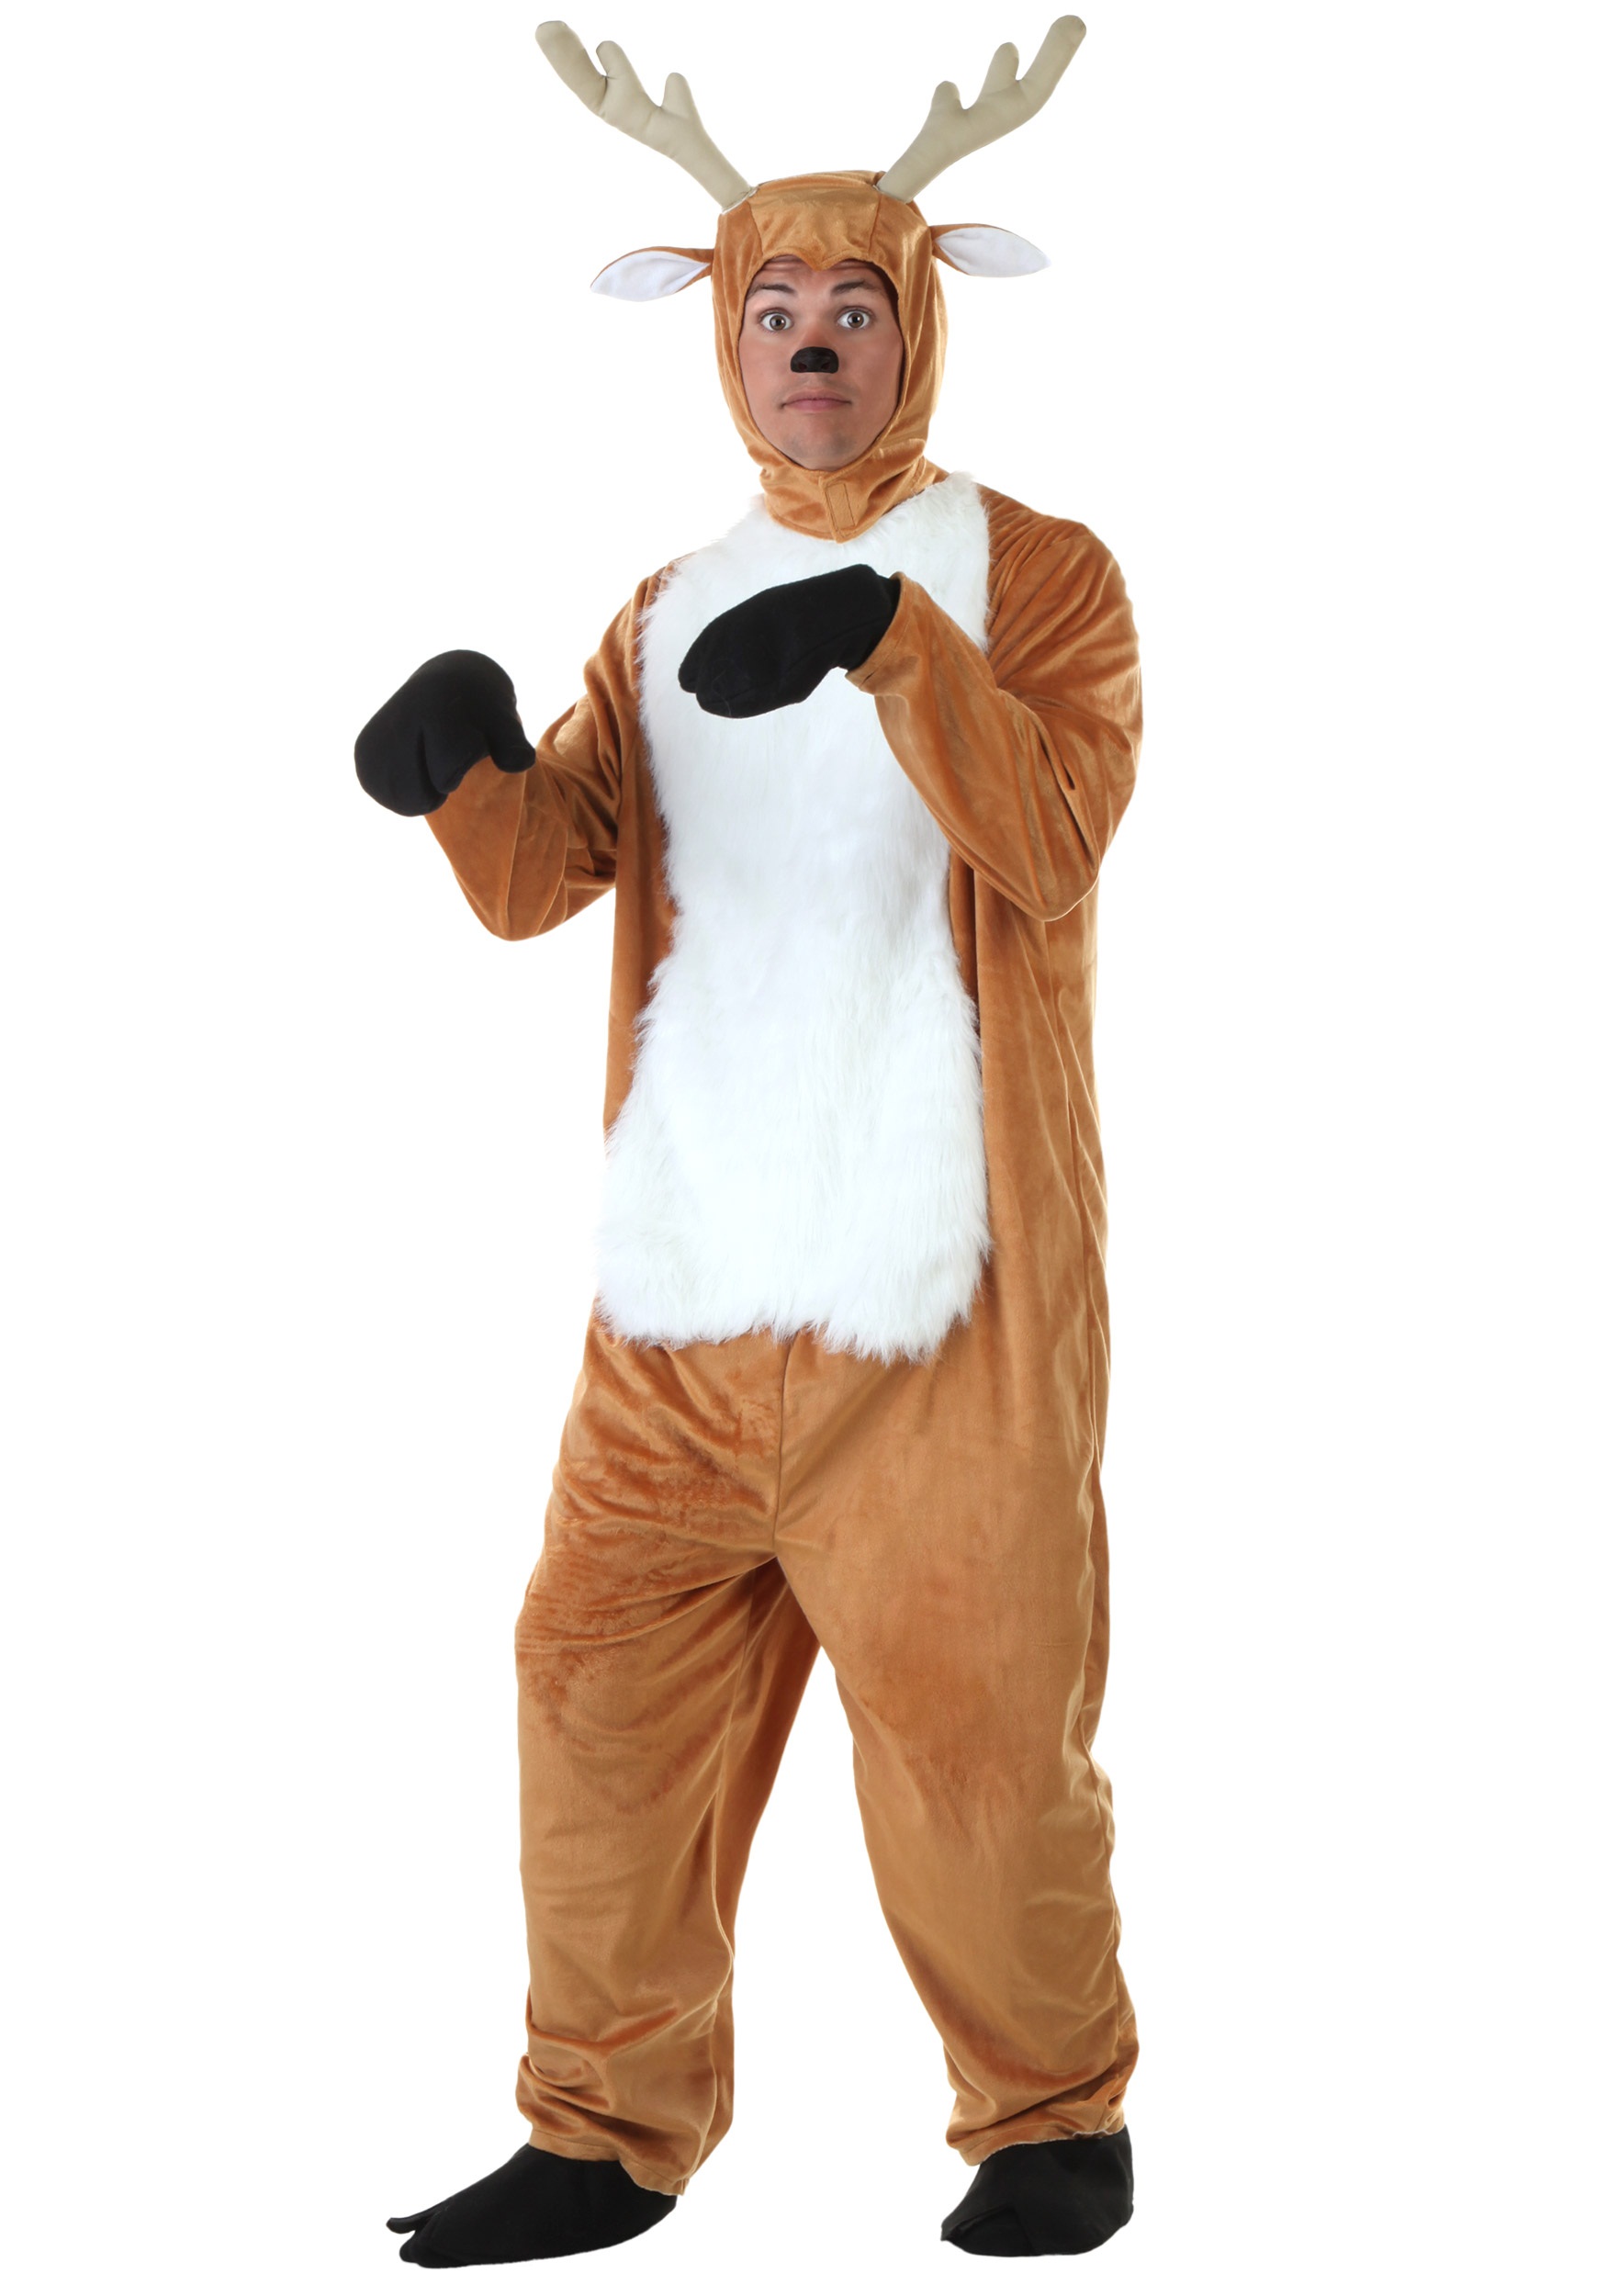 Photos - Fancy Dress FUN Costumes Deer Costume for Adults Black/Brown/Gray/White FU